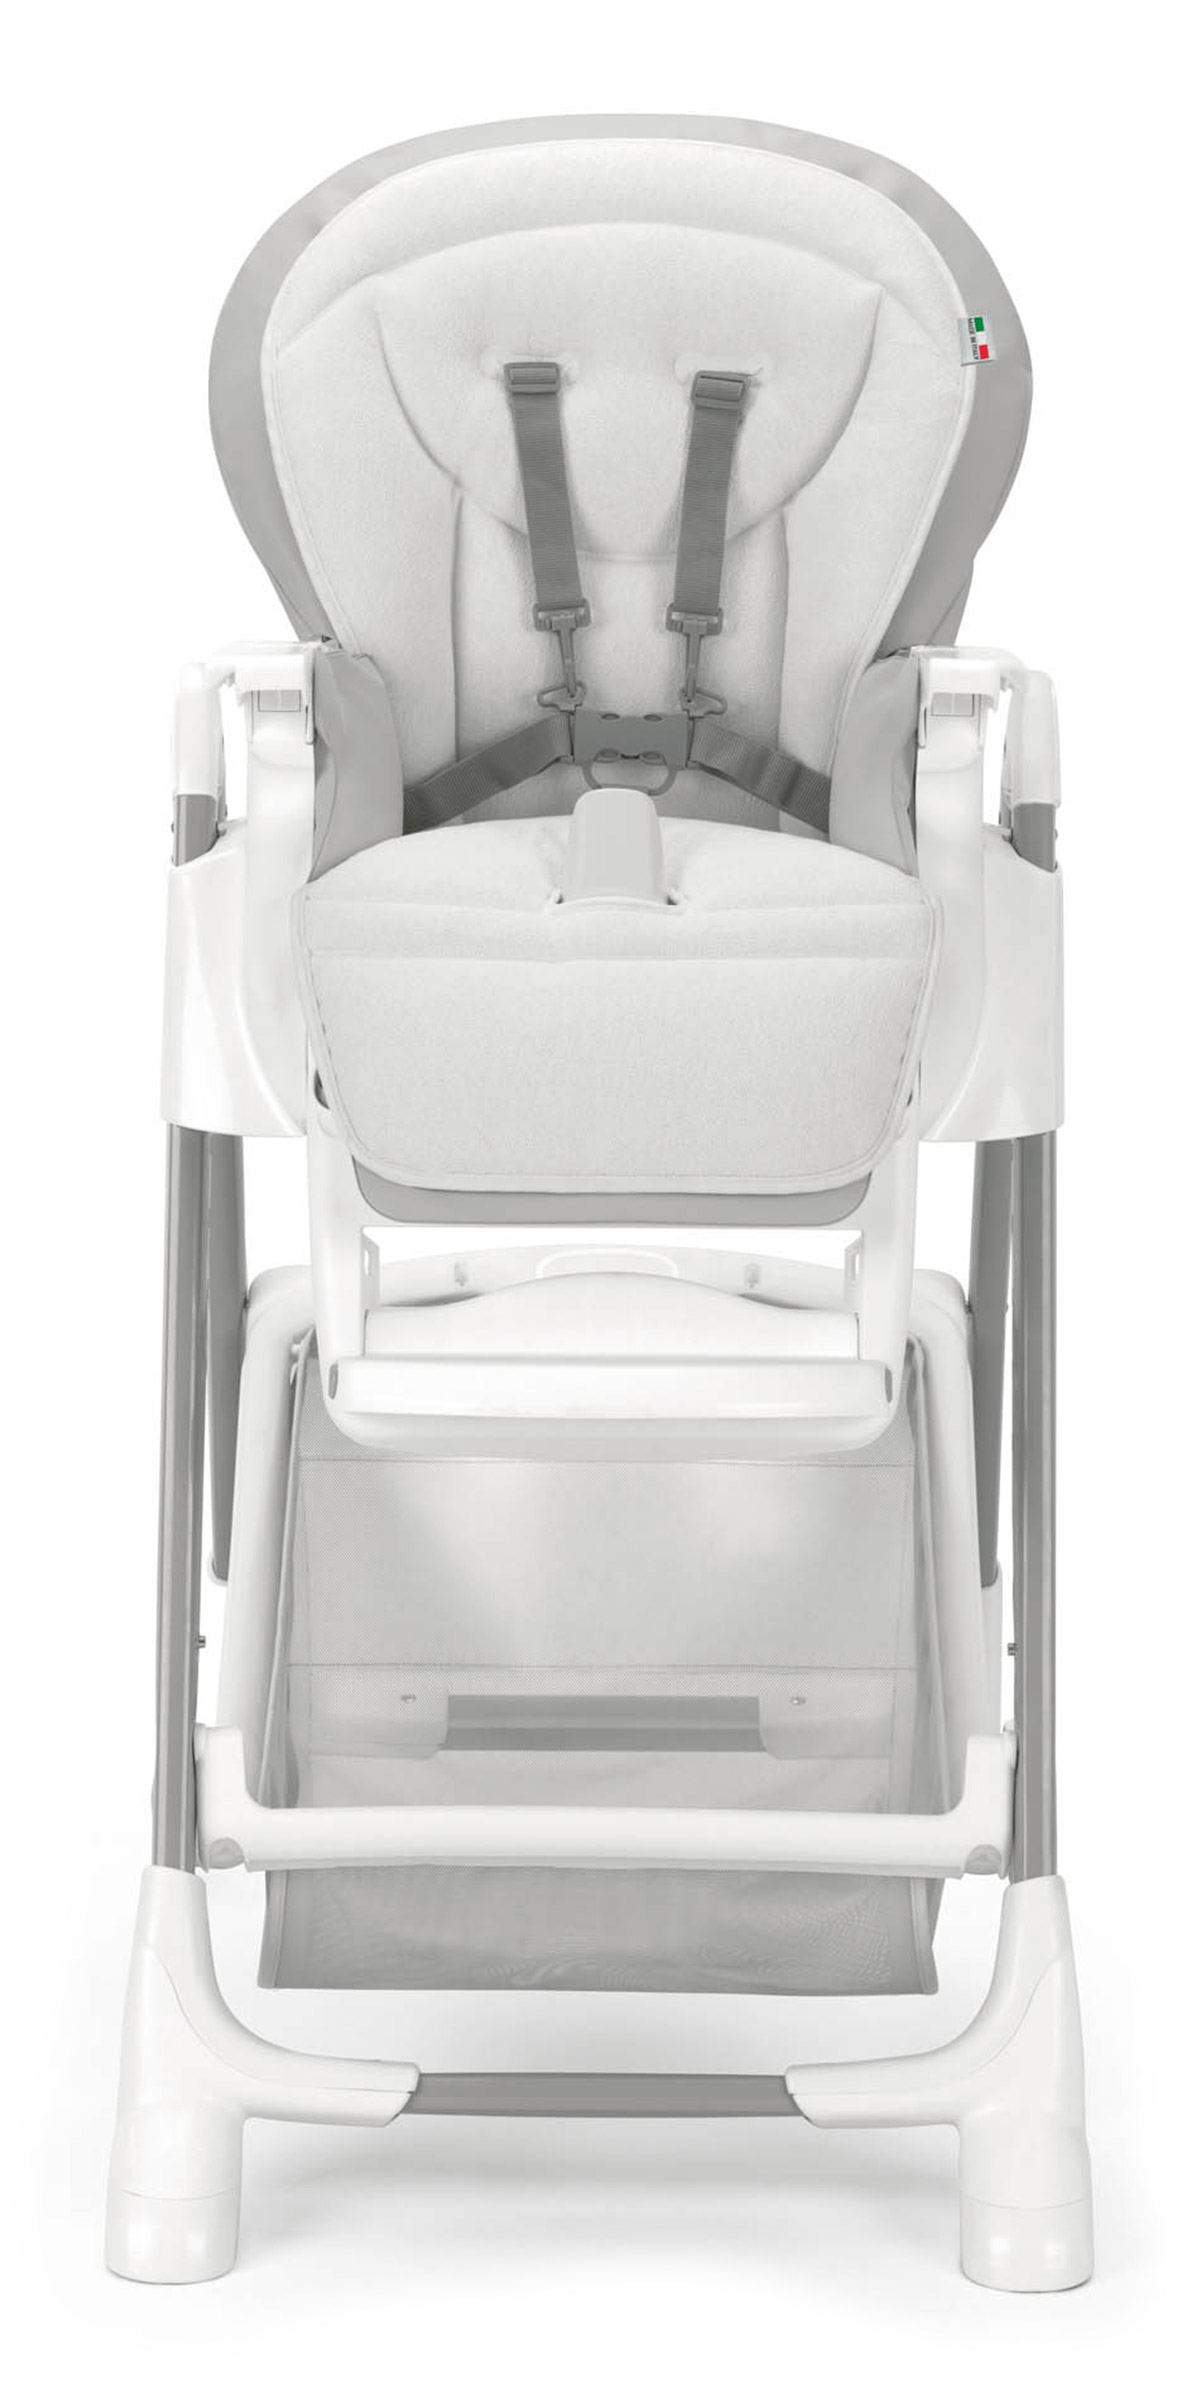 CAM Gusto Baby High Chair S2500 Series Best Price in UAE